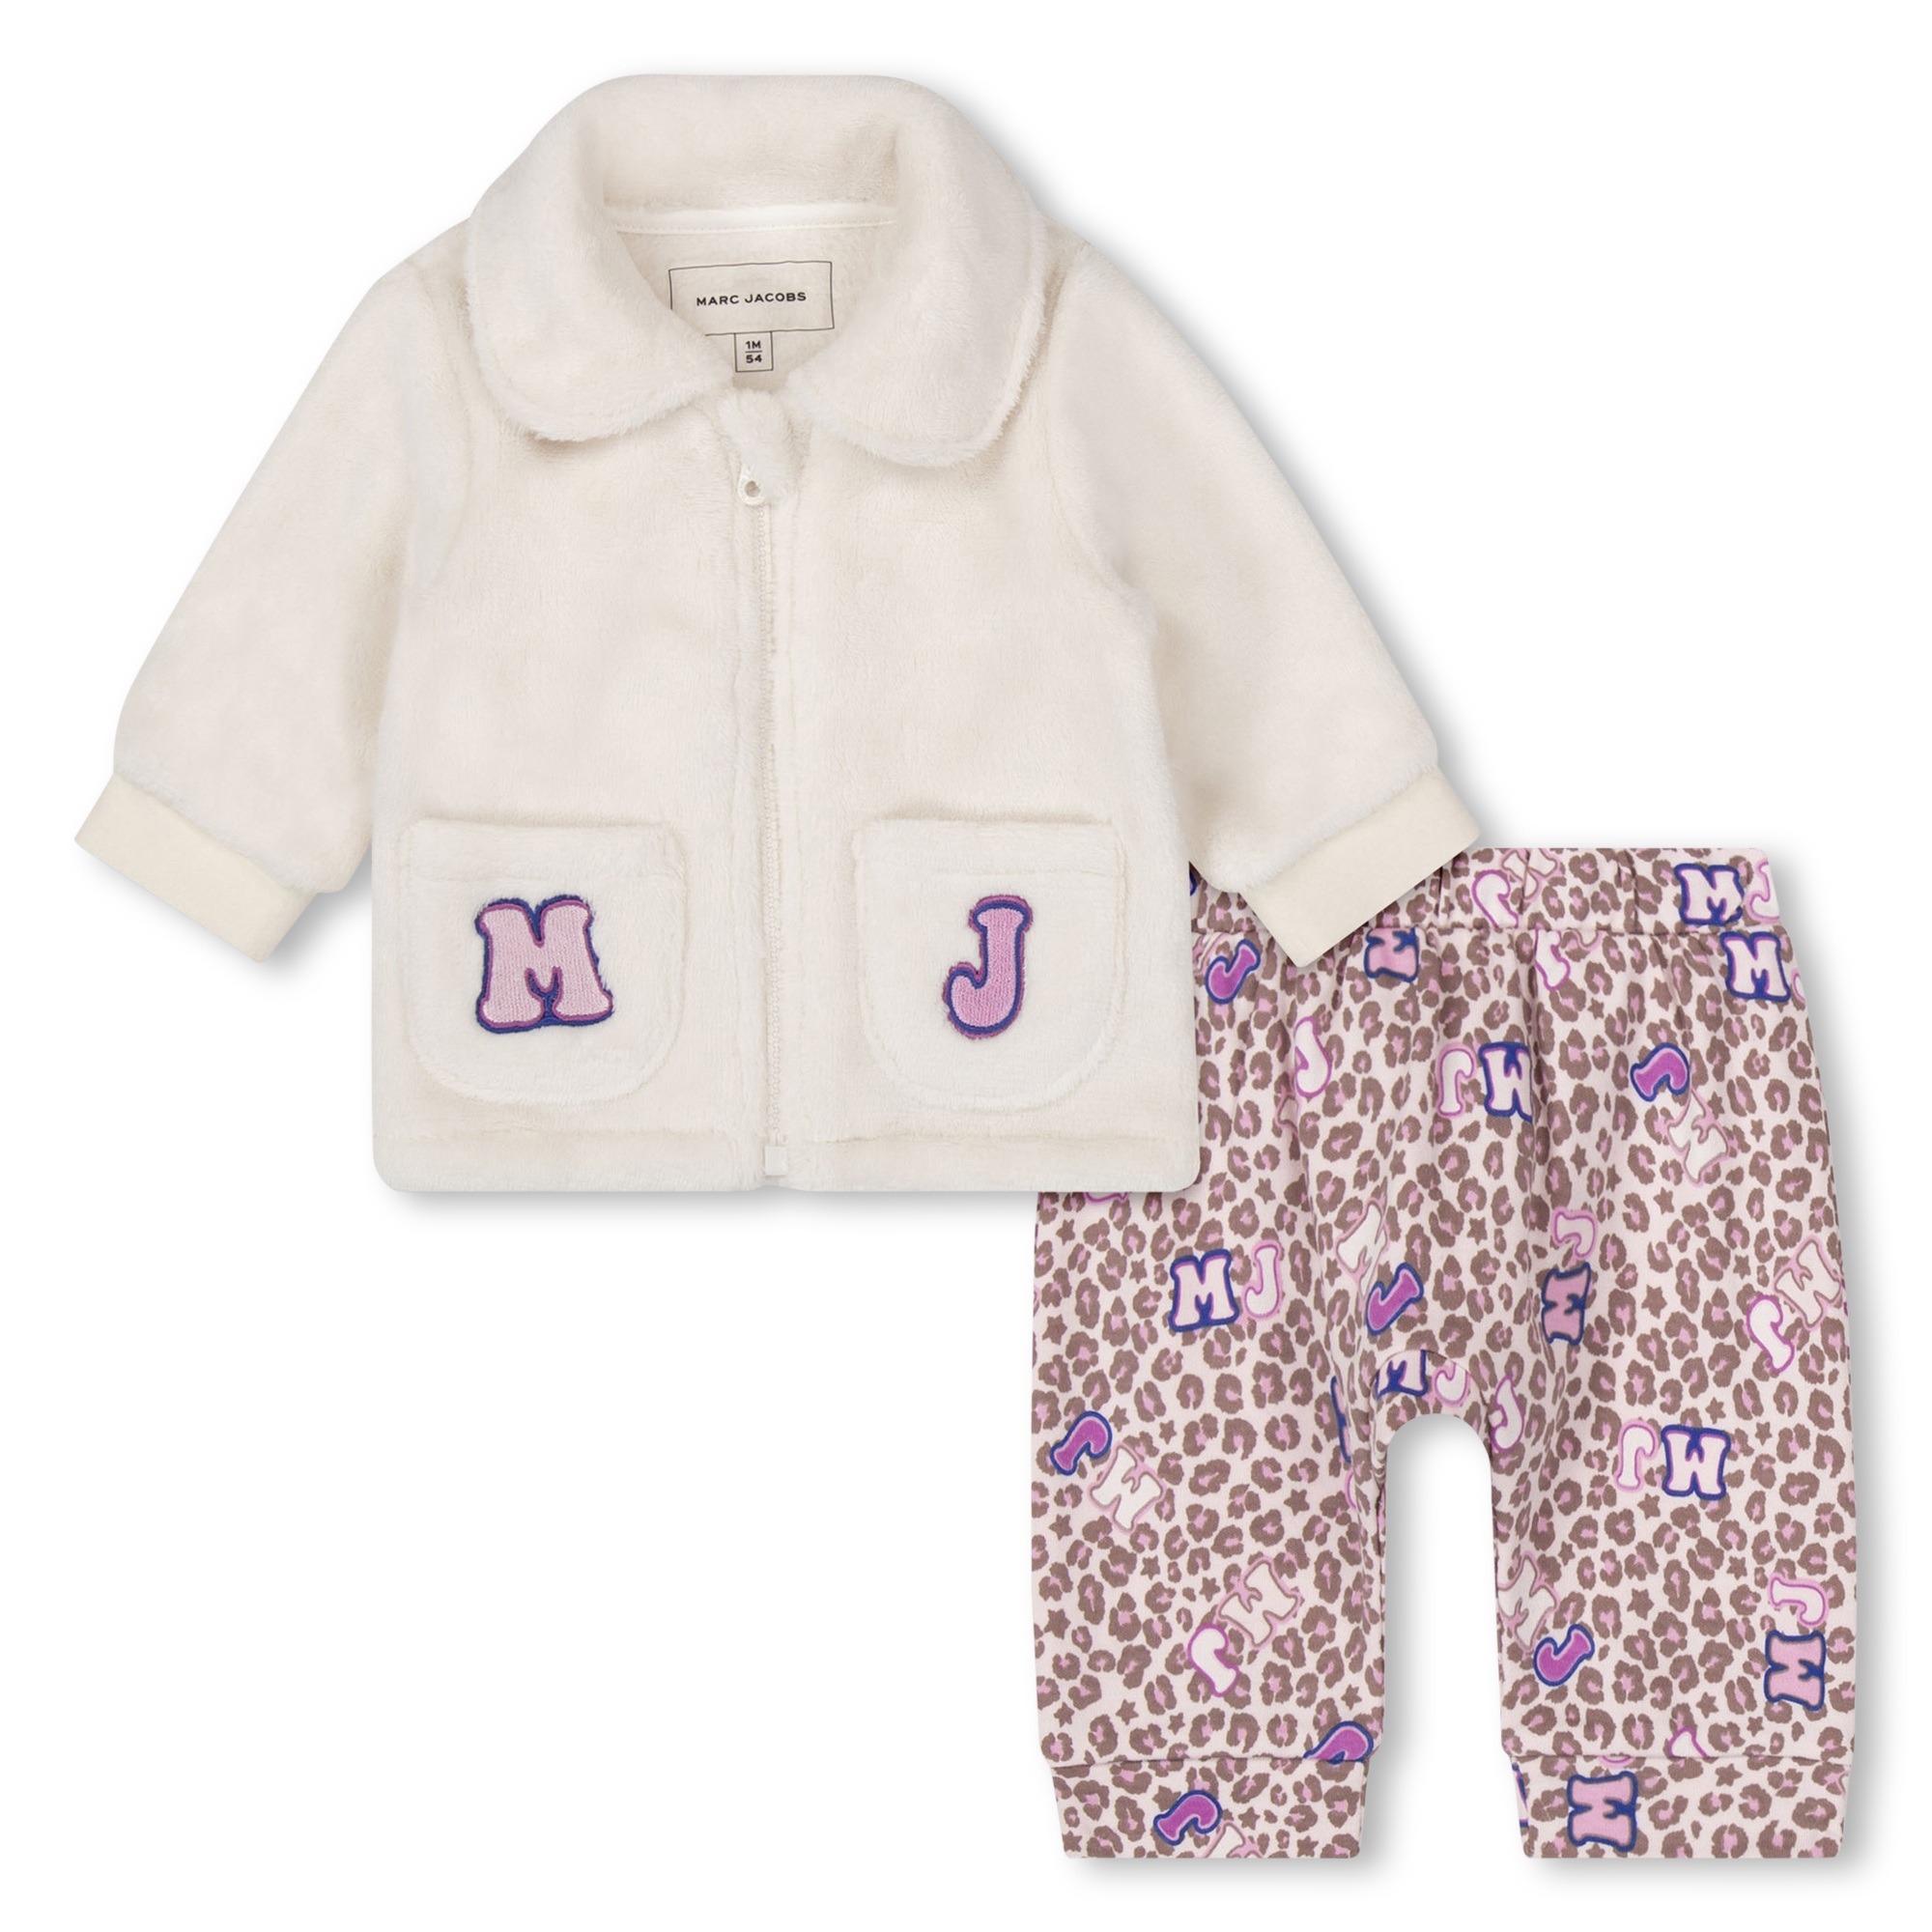 Zipped cardigan and leggings set MARC JACOBS for UNISEX